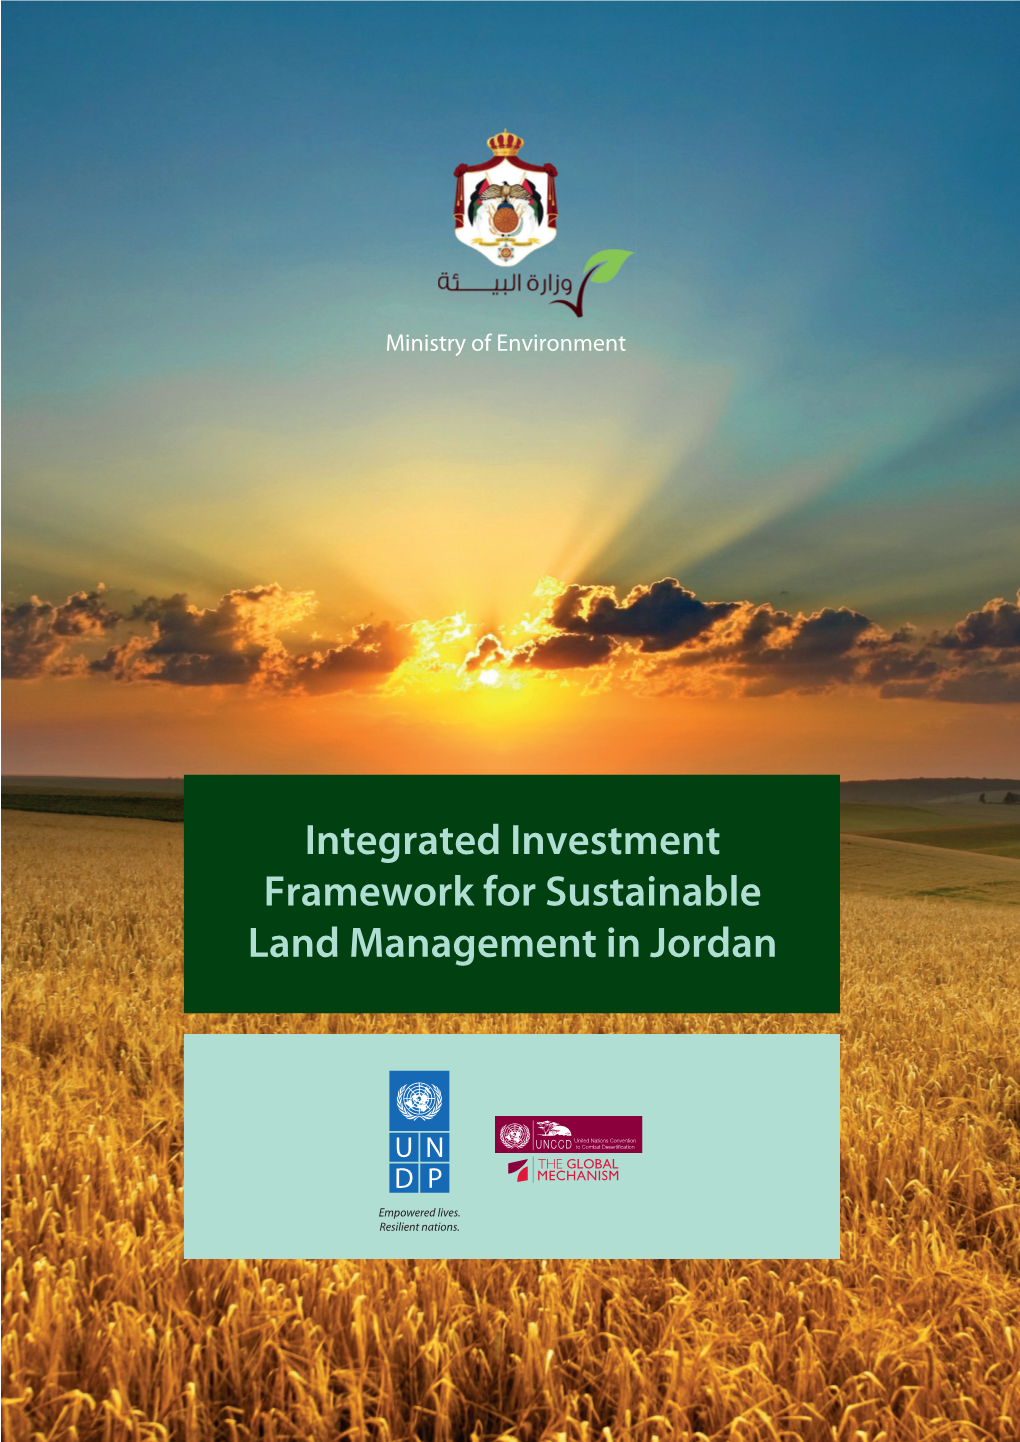 Jordan the Deposit Number at the National Library (2015/3/1000) INTEGRATED INVESTMENT FRAMEWORK for SUSTAINABLE LAND MANAGEMENT in JORDAN